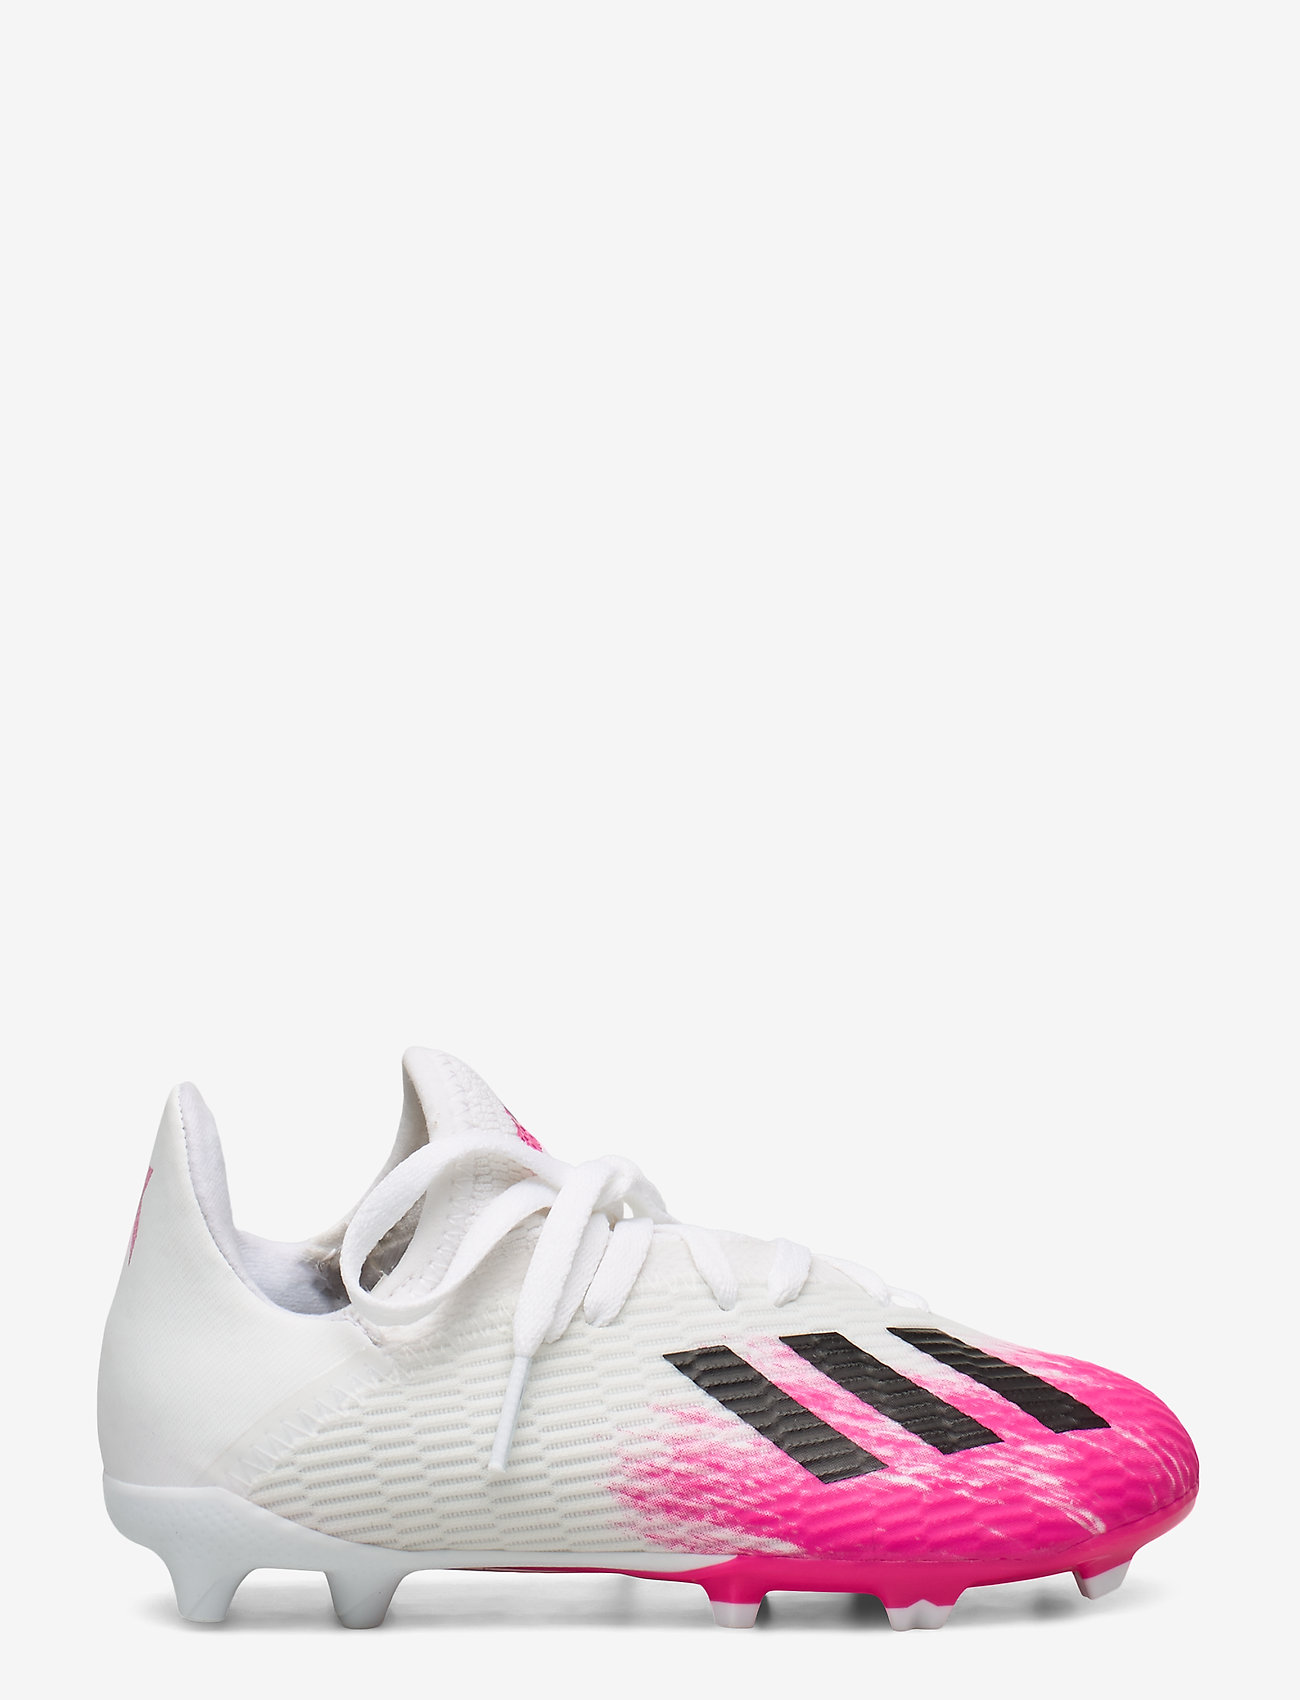 adidas performance x 19.3 firm ground boots